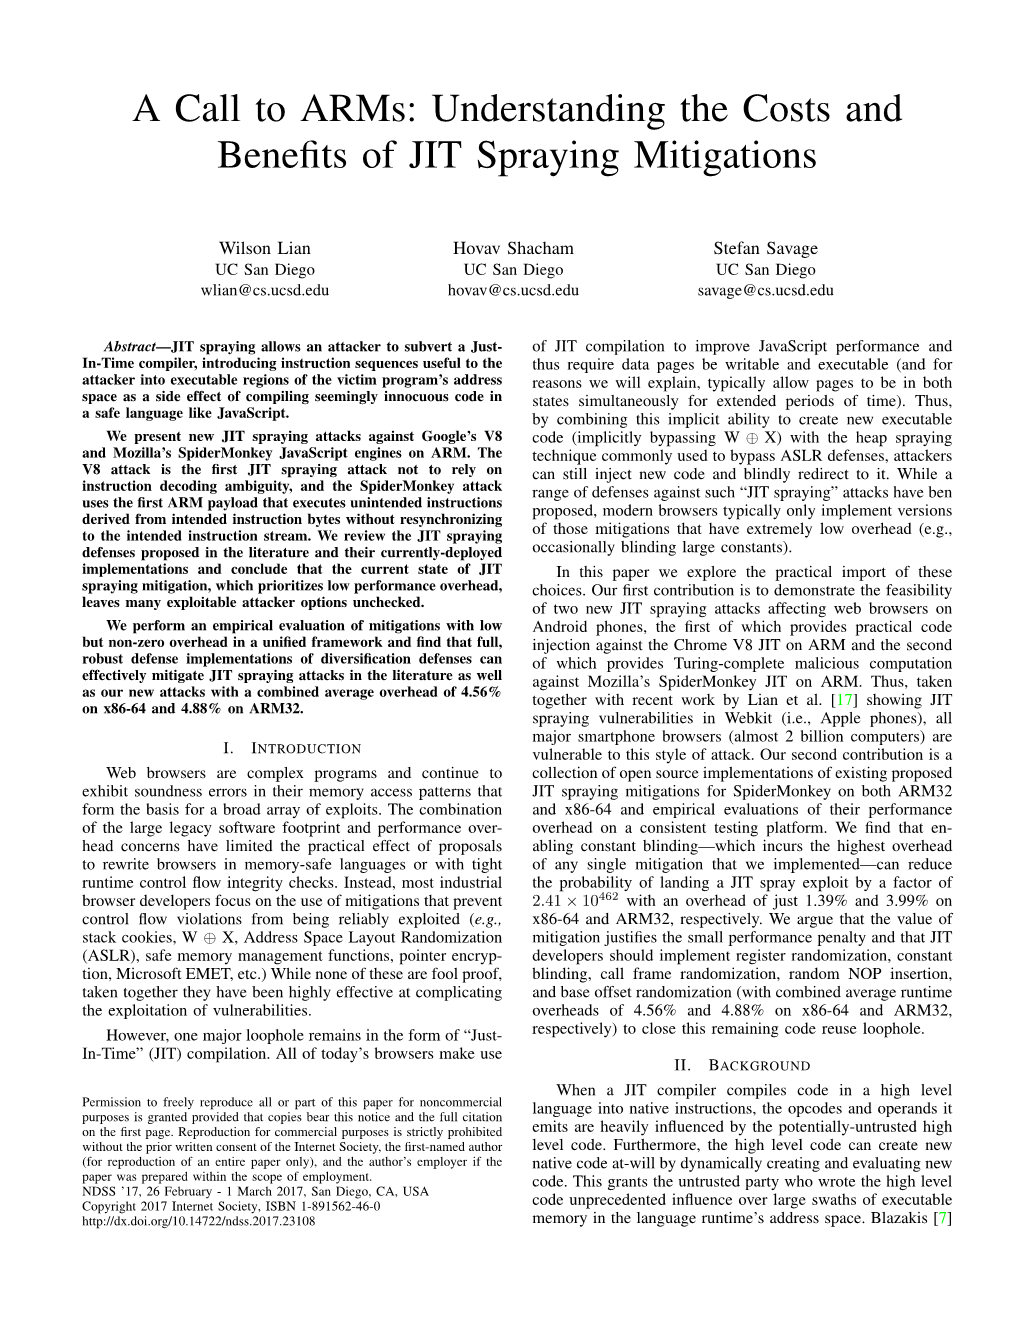 Understanding the Costs and Benefits of JIT Spraying Mitigations